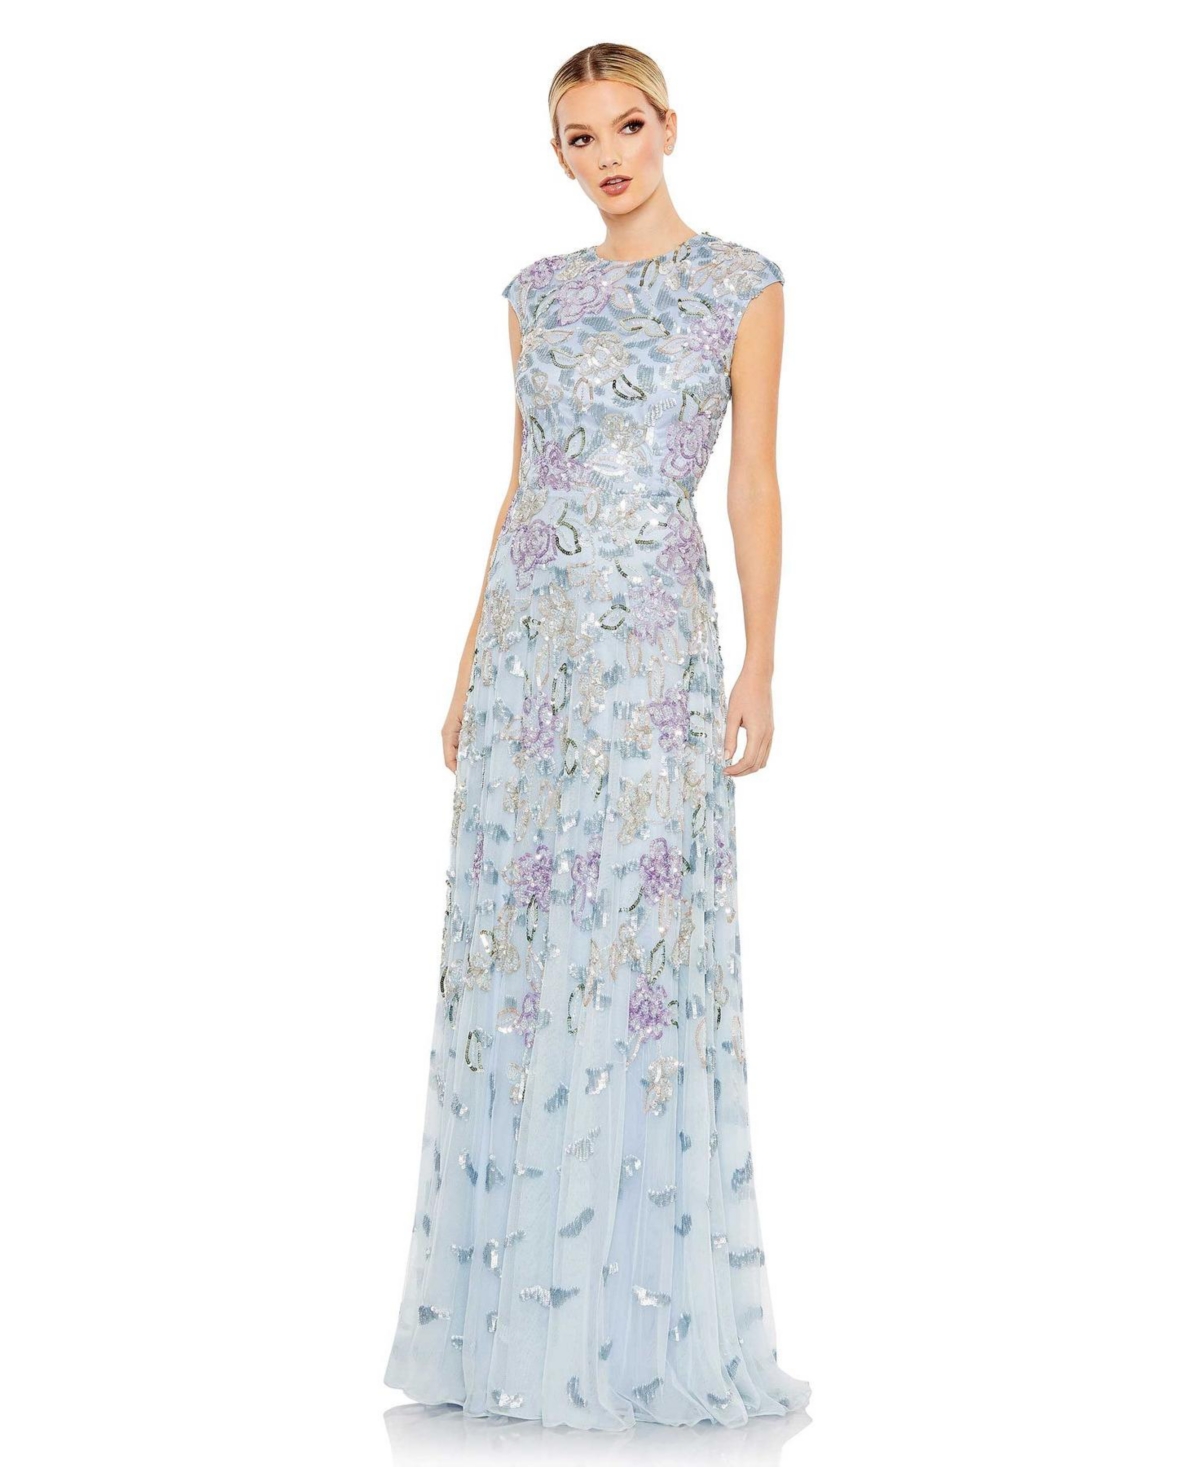 Women's Sequined High Neck Cap Sleeve A Line Gown - Ice blue multi